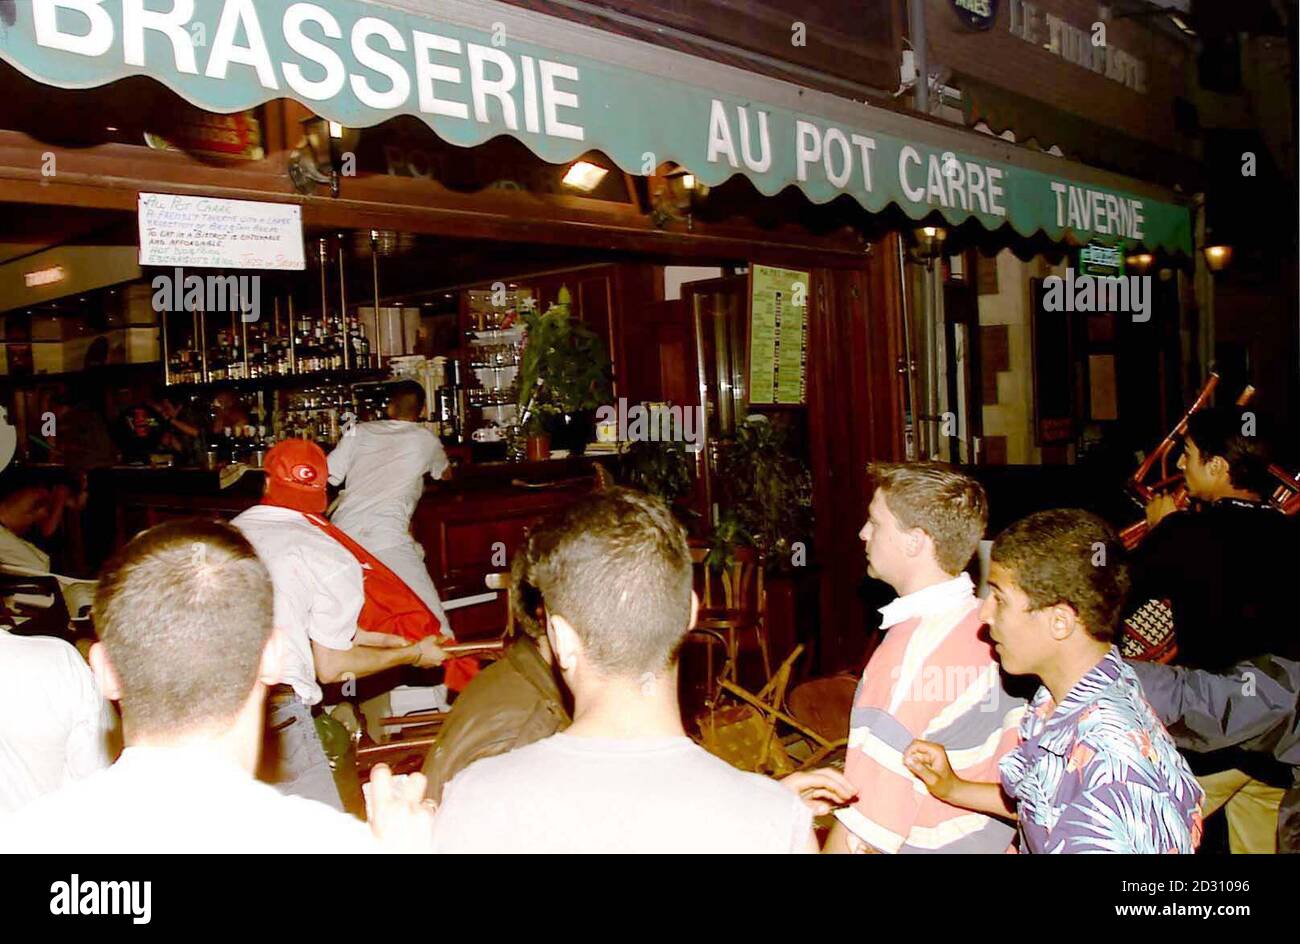 A Turkish soccer fan throws a chair through a bar window (R) after their victory against Belgium in the Euro 2000 championships in Brussels. They went on a violent rampage of the city, smashing bars and hunting for English fans to attack. Stock Photo